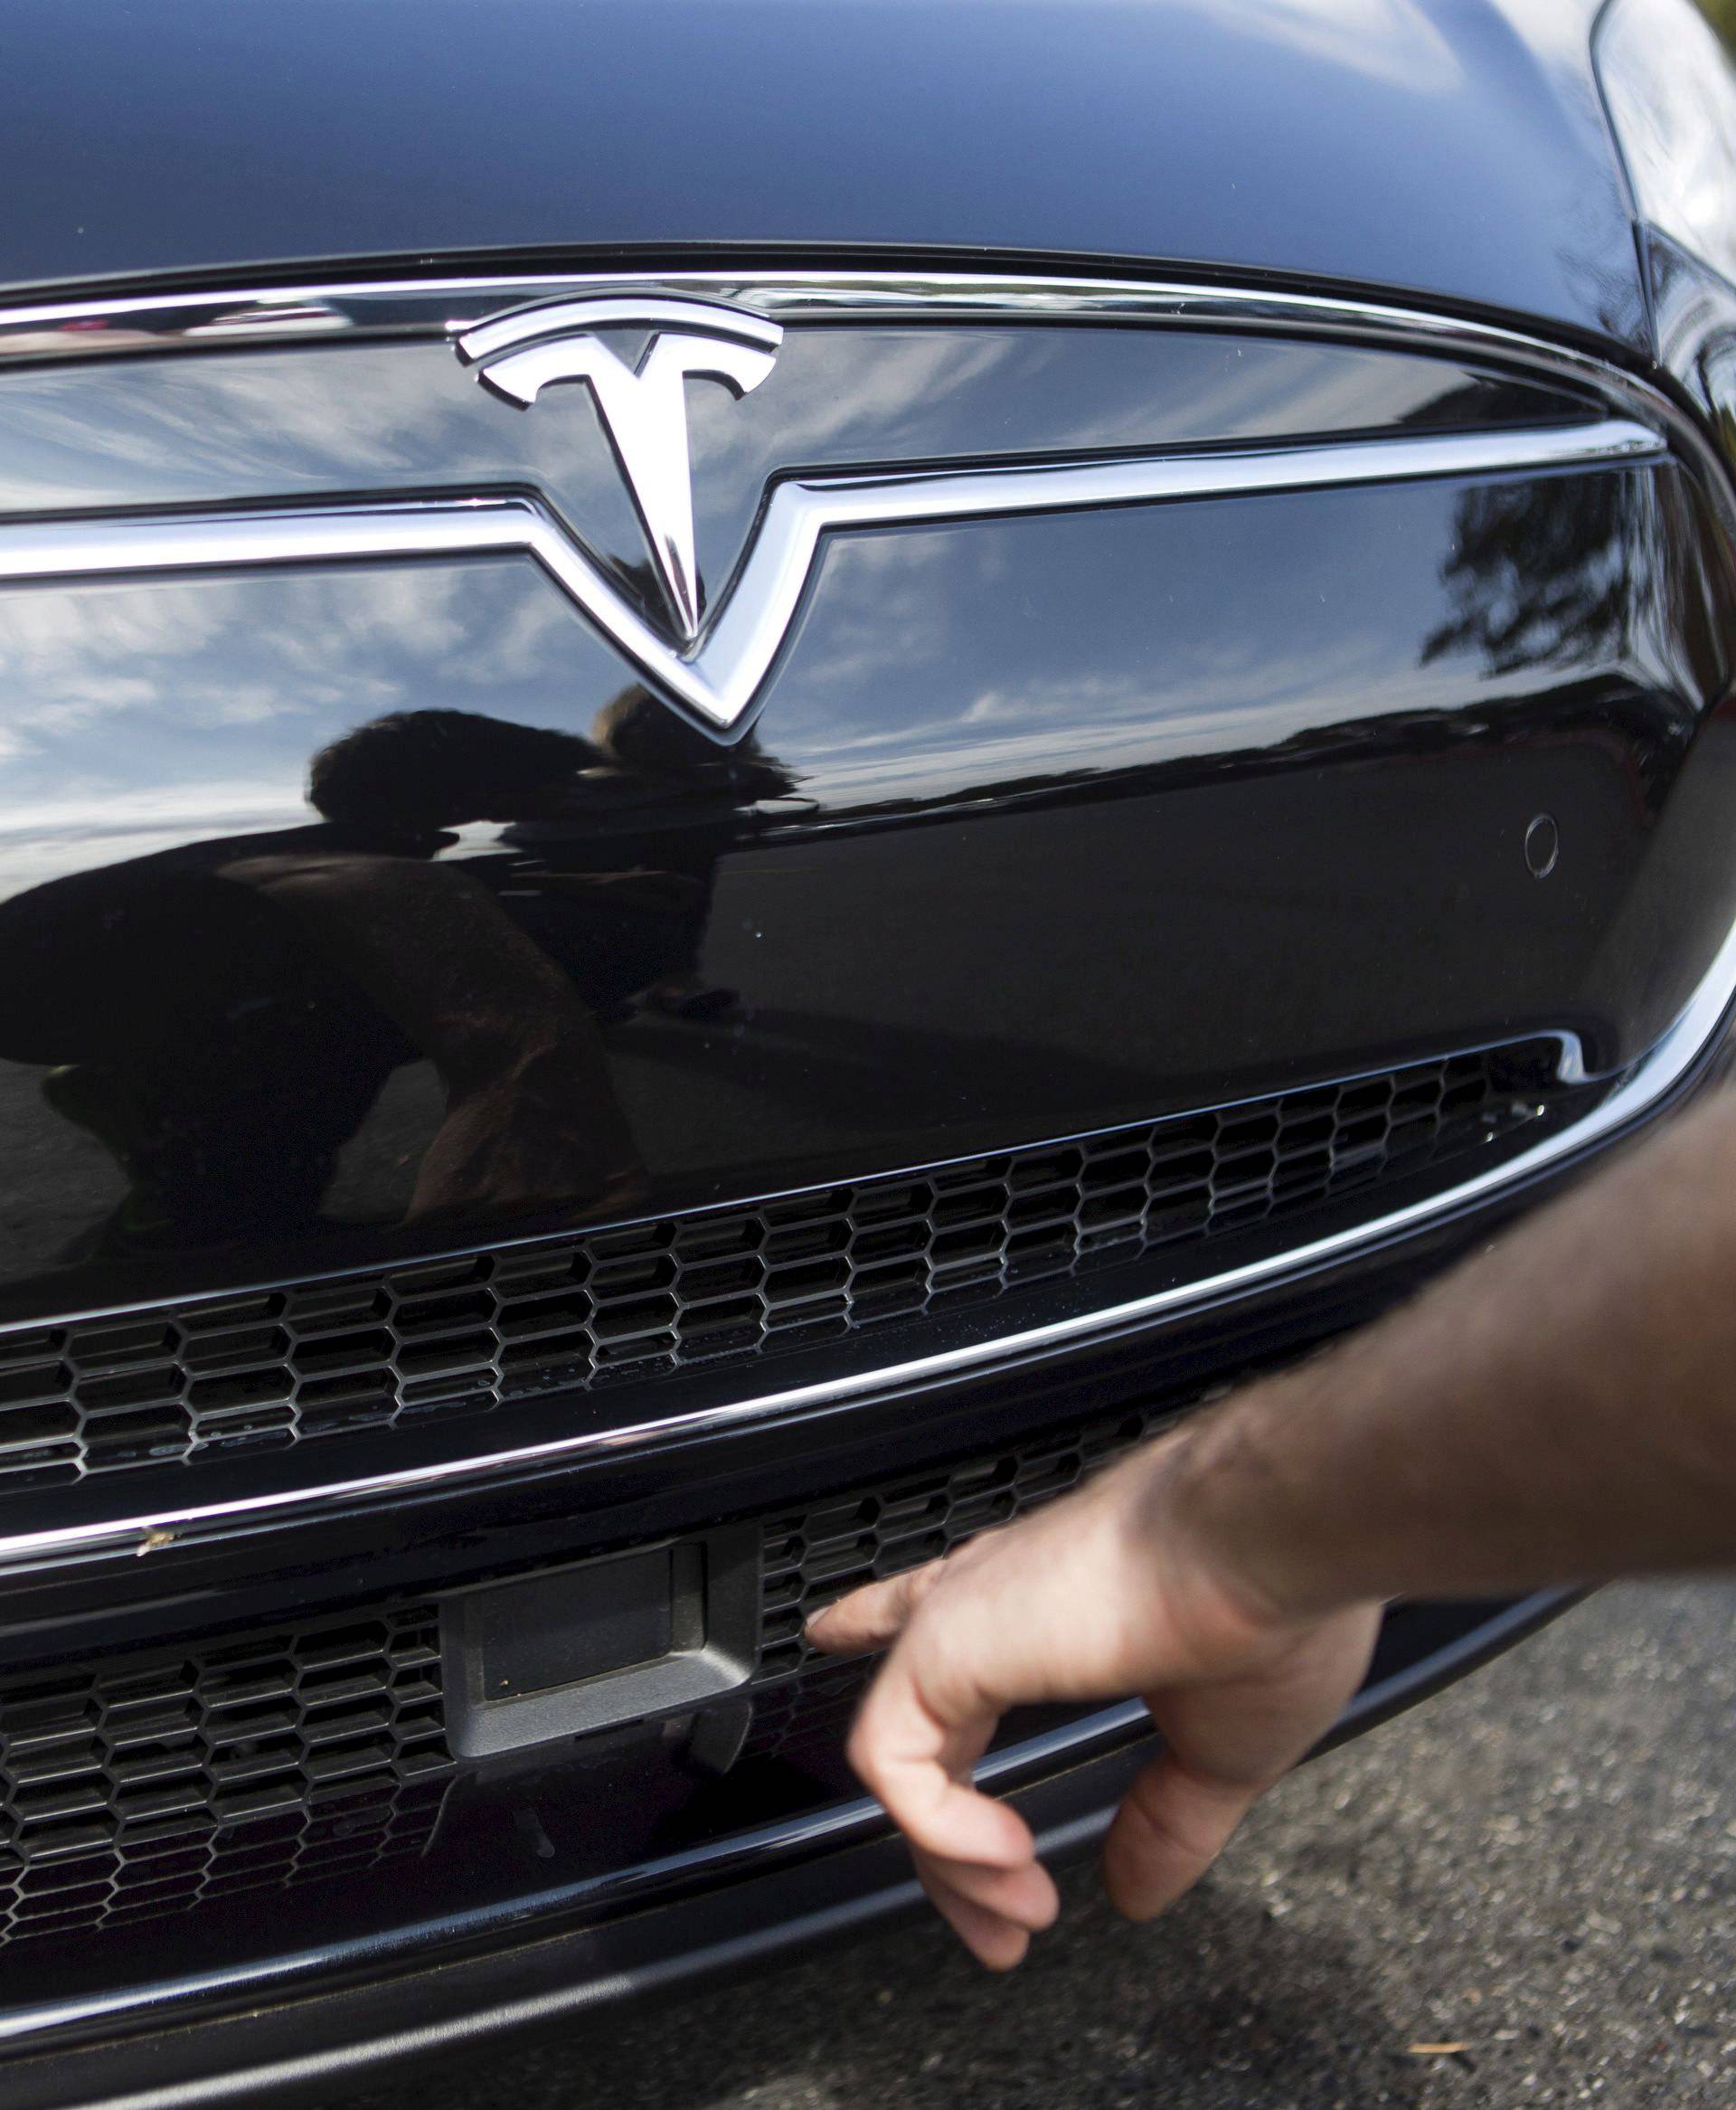 The radar technology of a Tesla Model S being pointed out during a Tesla event in Palo Alto